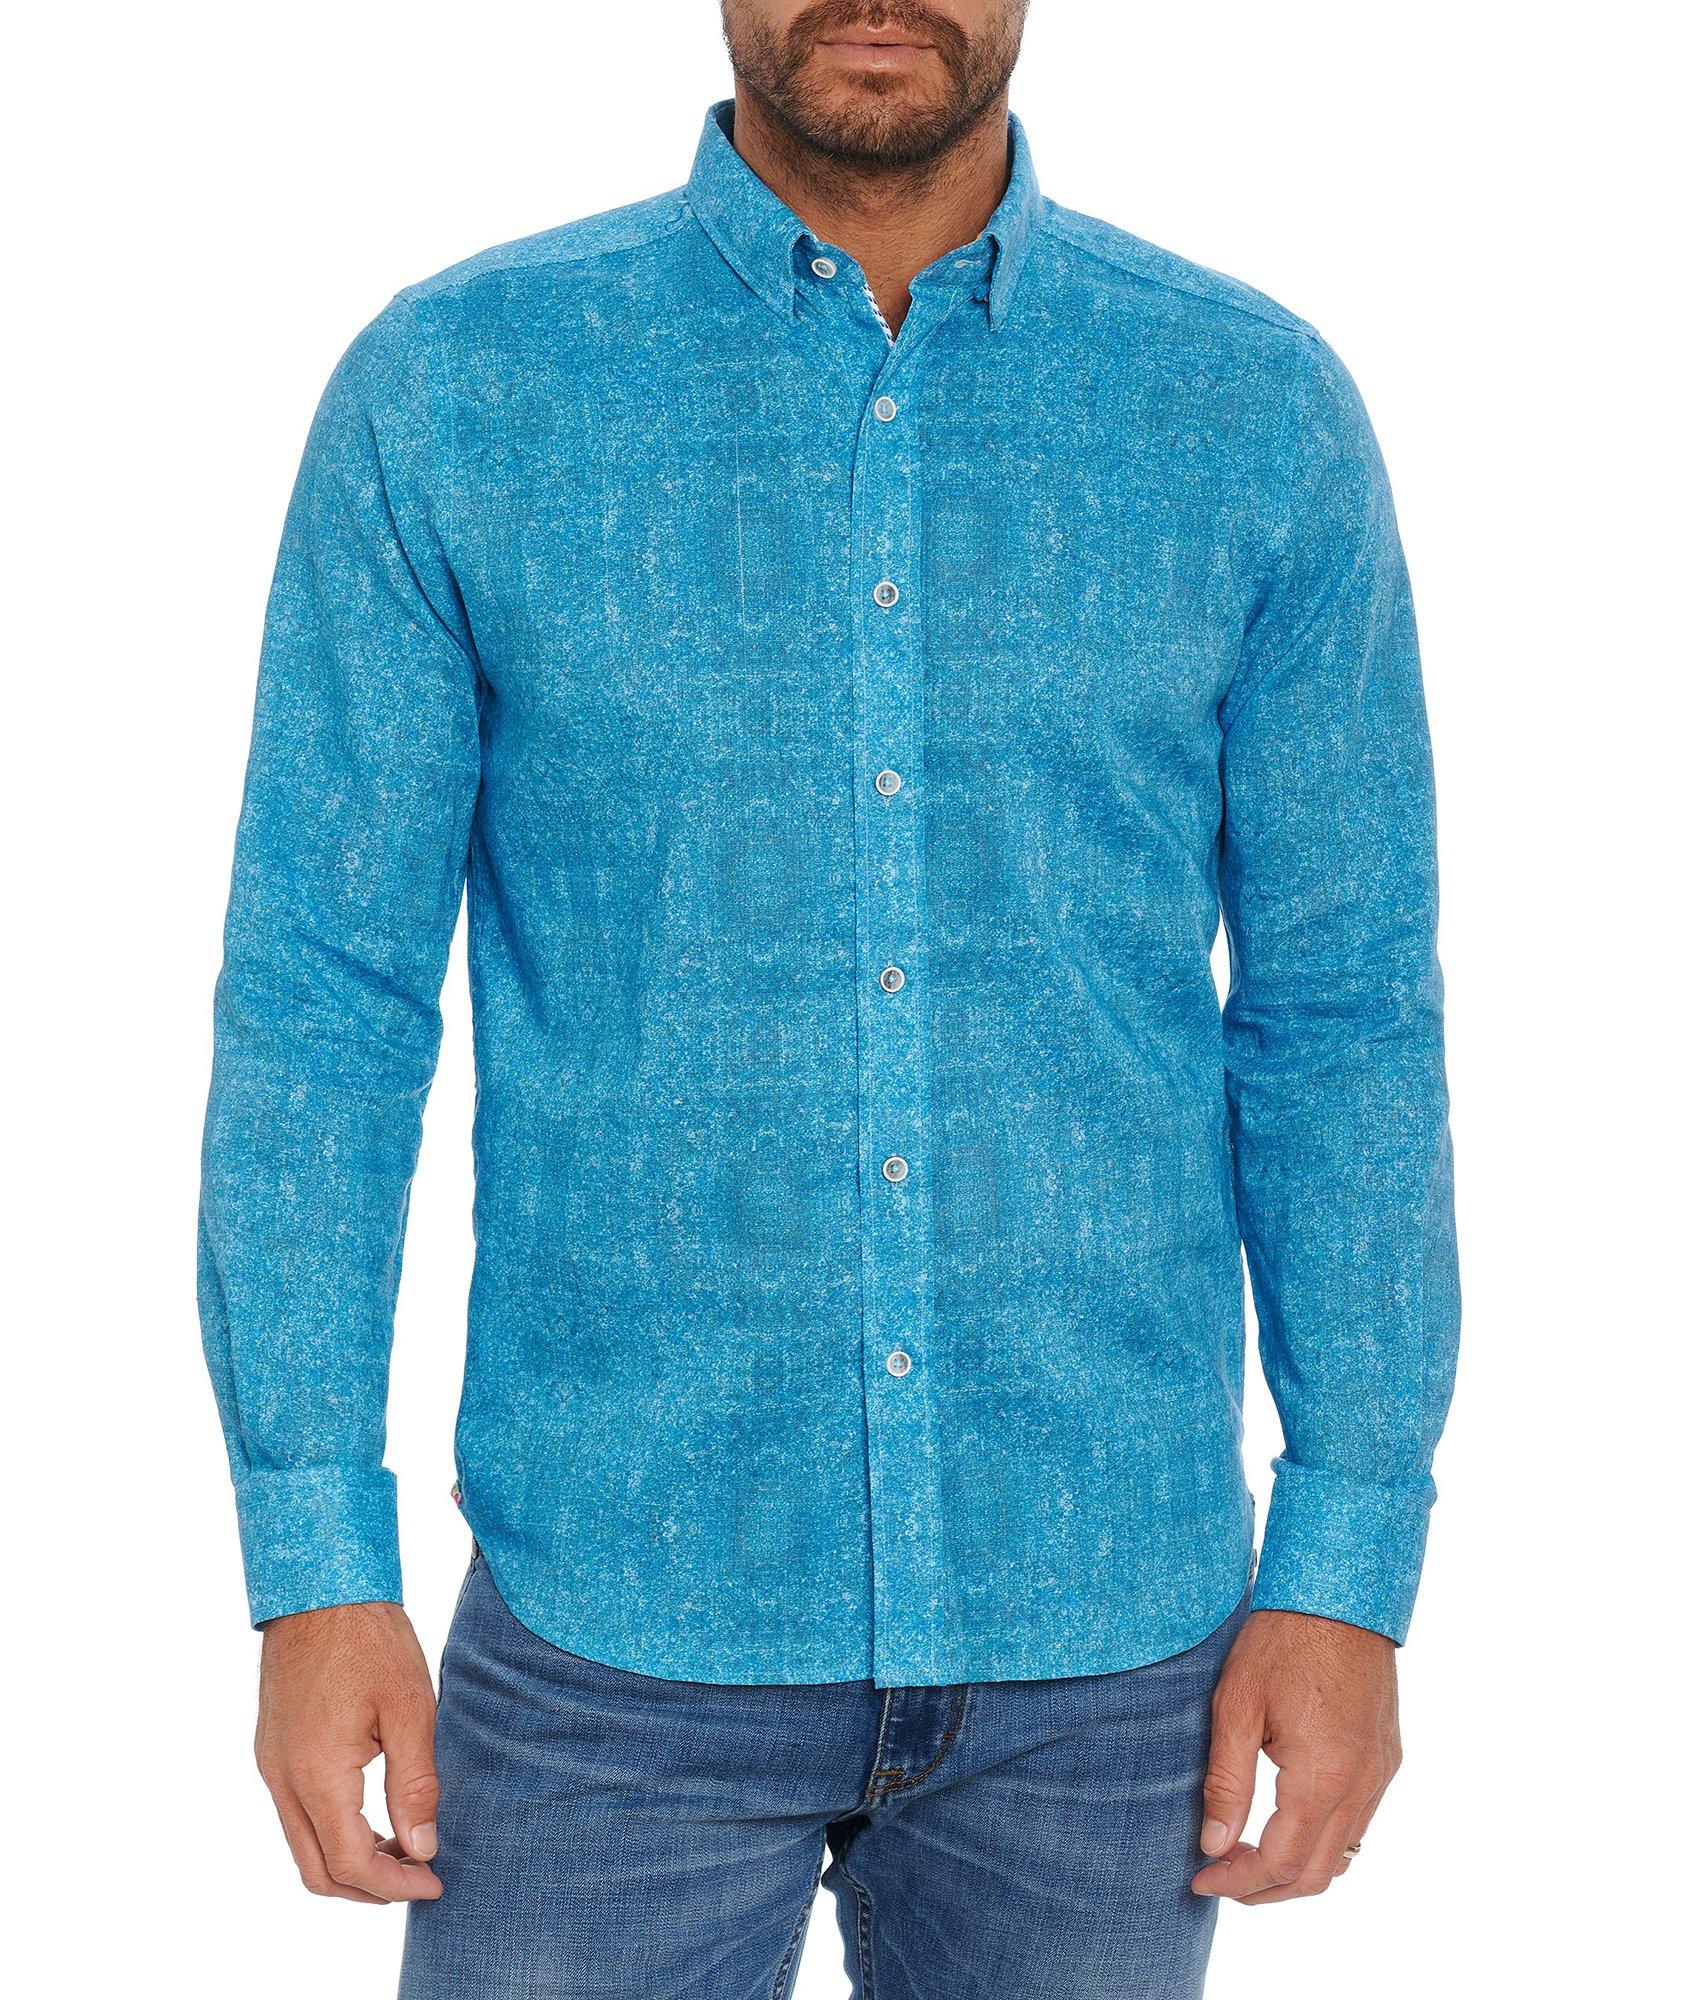 Harpswell Tailored Fit Shirt image 0